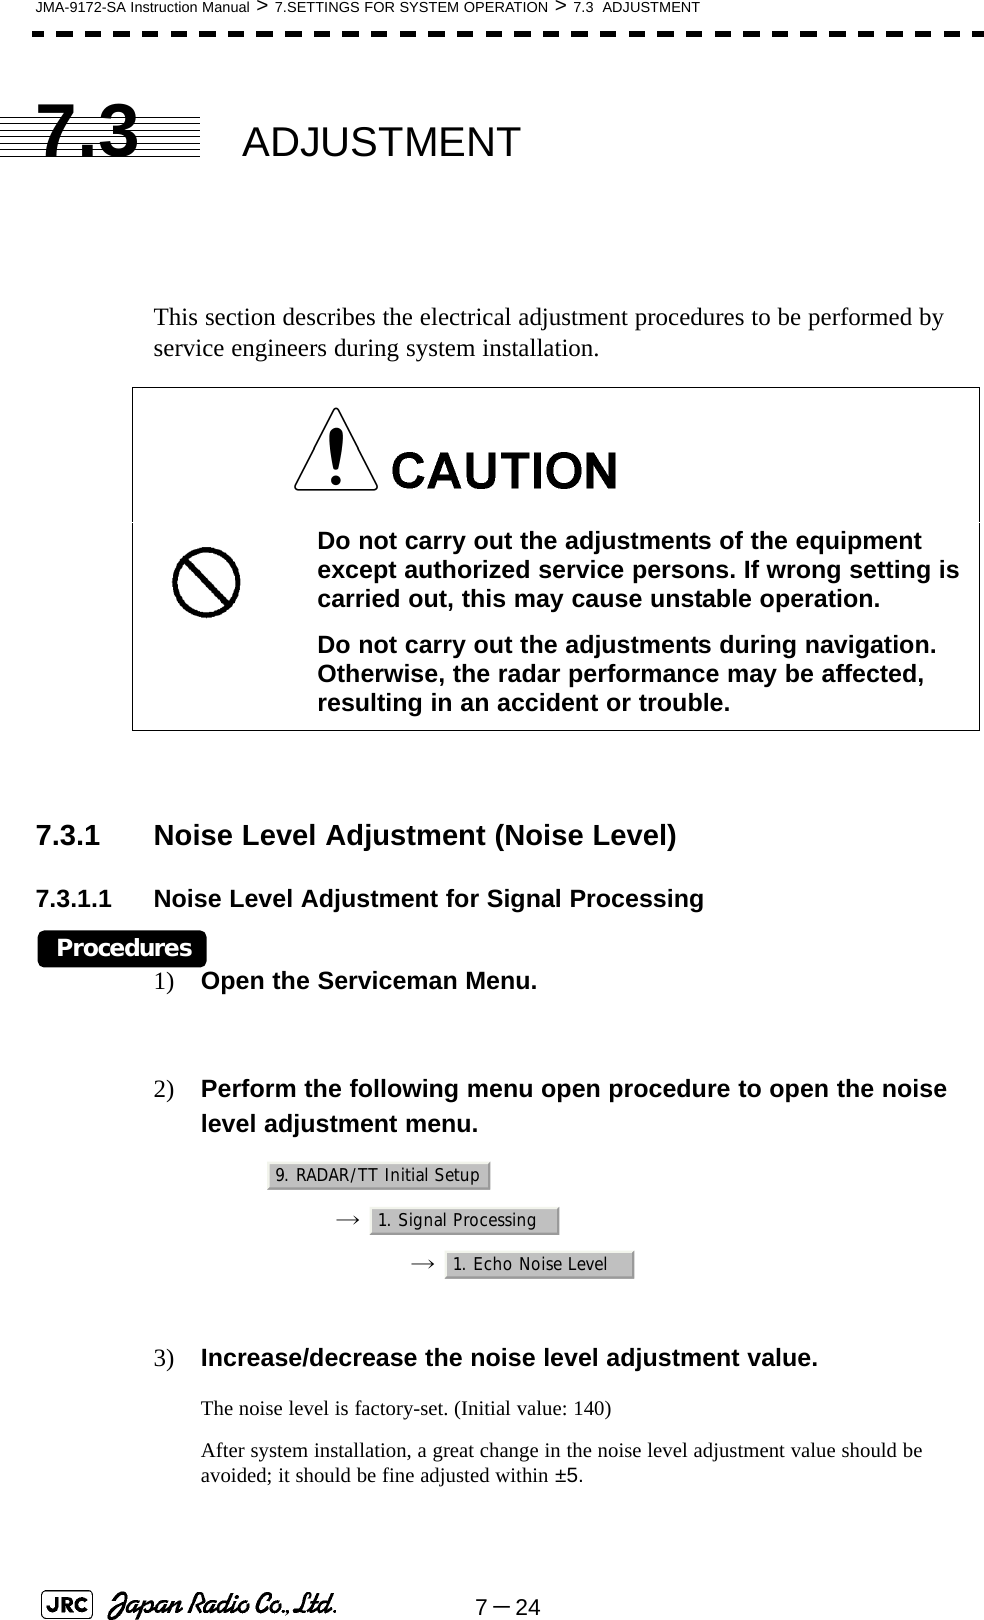 7－24JMA-9172-SA Instruction Manual &gt; 7.SETTINGS FOR SYSTEM OPERATION &gt; 7.3  ADJUSTMENT7.3 ADJUSTMENTThis section describes the electrical adjustment procedures to be performed by service engineers during system installation.7.3.1 Noise Level Adjustment (Noise Level)7.3.1.1 Noise Level Adjustment for Signal ProcessingProcedures1) Open the Serviceman Menu.2) Perform the following menu open procedure to open the noise level adjustment menu.→  →  3) Increase/decrease the noise level adjustment value.The noise level is factory-set. (Initial value: 140)After system installation, a great change in the noise level adjustment value should be avoided; it should be fine adjusted within ±5. Do not carry out the adjustments of the equipment except authorized service persons. If wrong setting is carried out, this may cause unstable operation.Do not carry out the adjustments during navigation. Otherwise, the radar performance may be affected, resulting in an accident or trouble.9. RADAR/TT Initial Setup1. Signal Processing1. Echo Noise Level